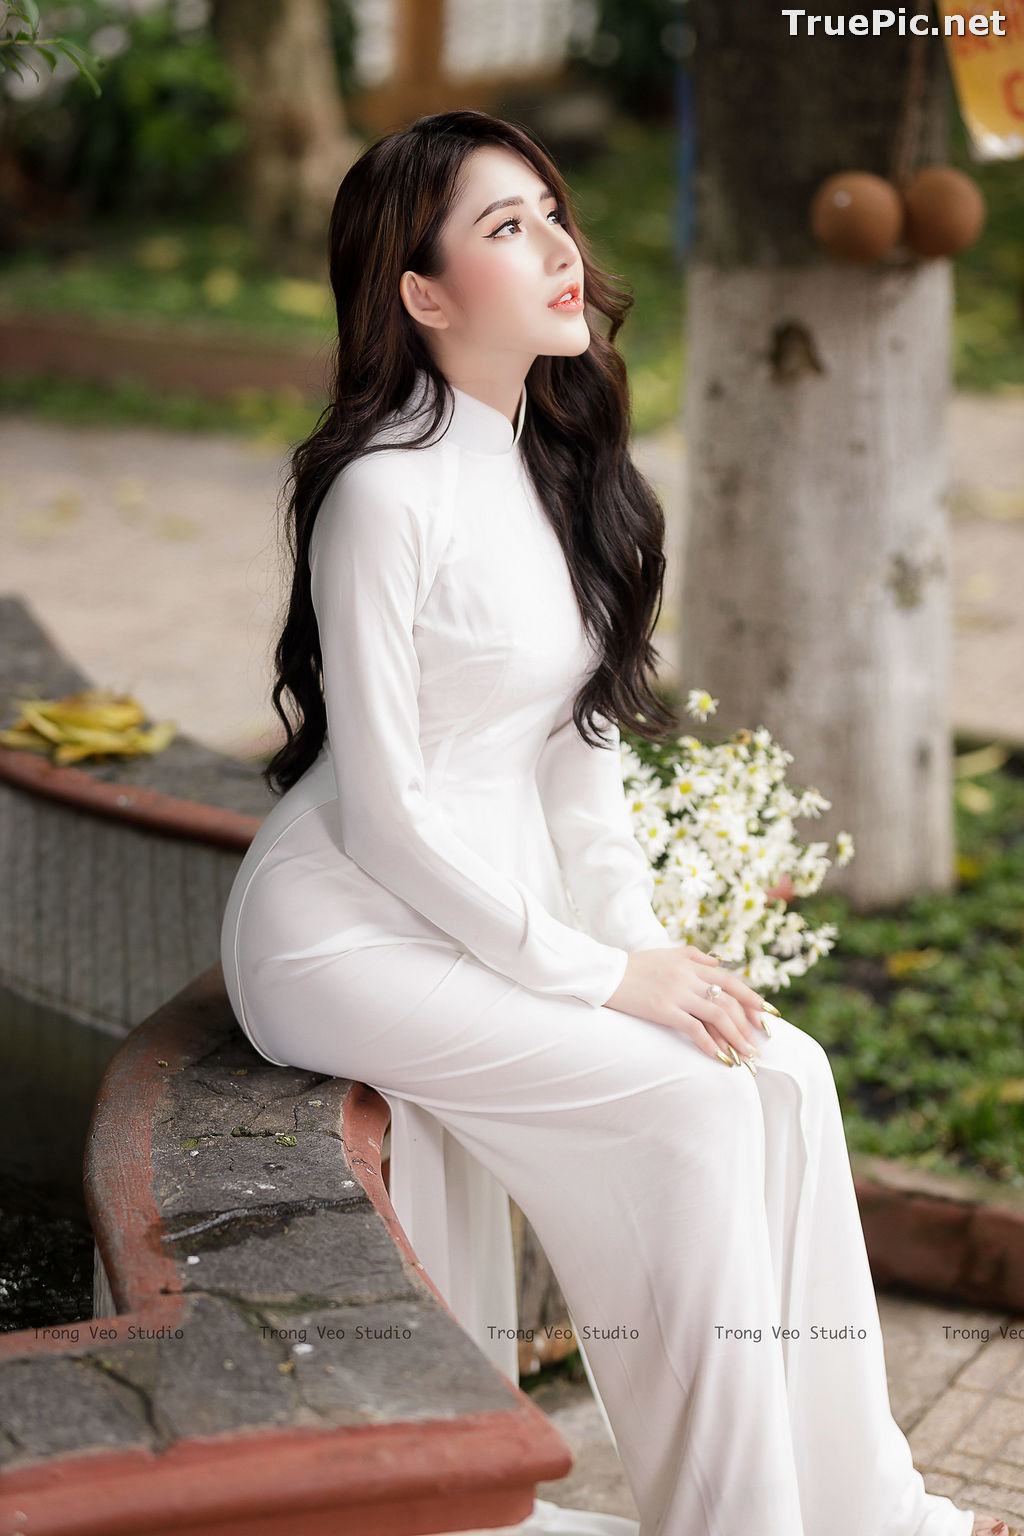 Image The Beauty of Vietnamese Girls with Traditional Dress (Ao Dai) #3 - TruePic.net - Picture-18